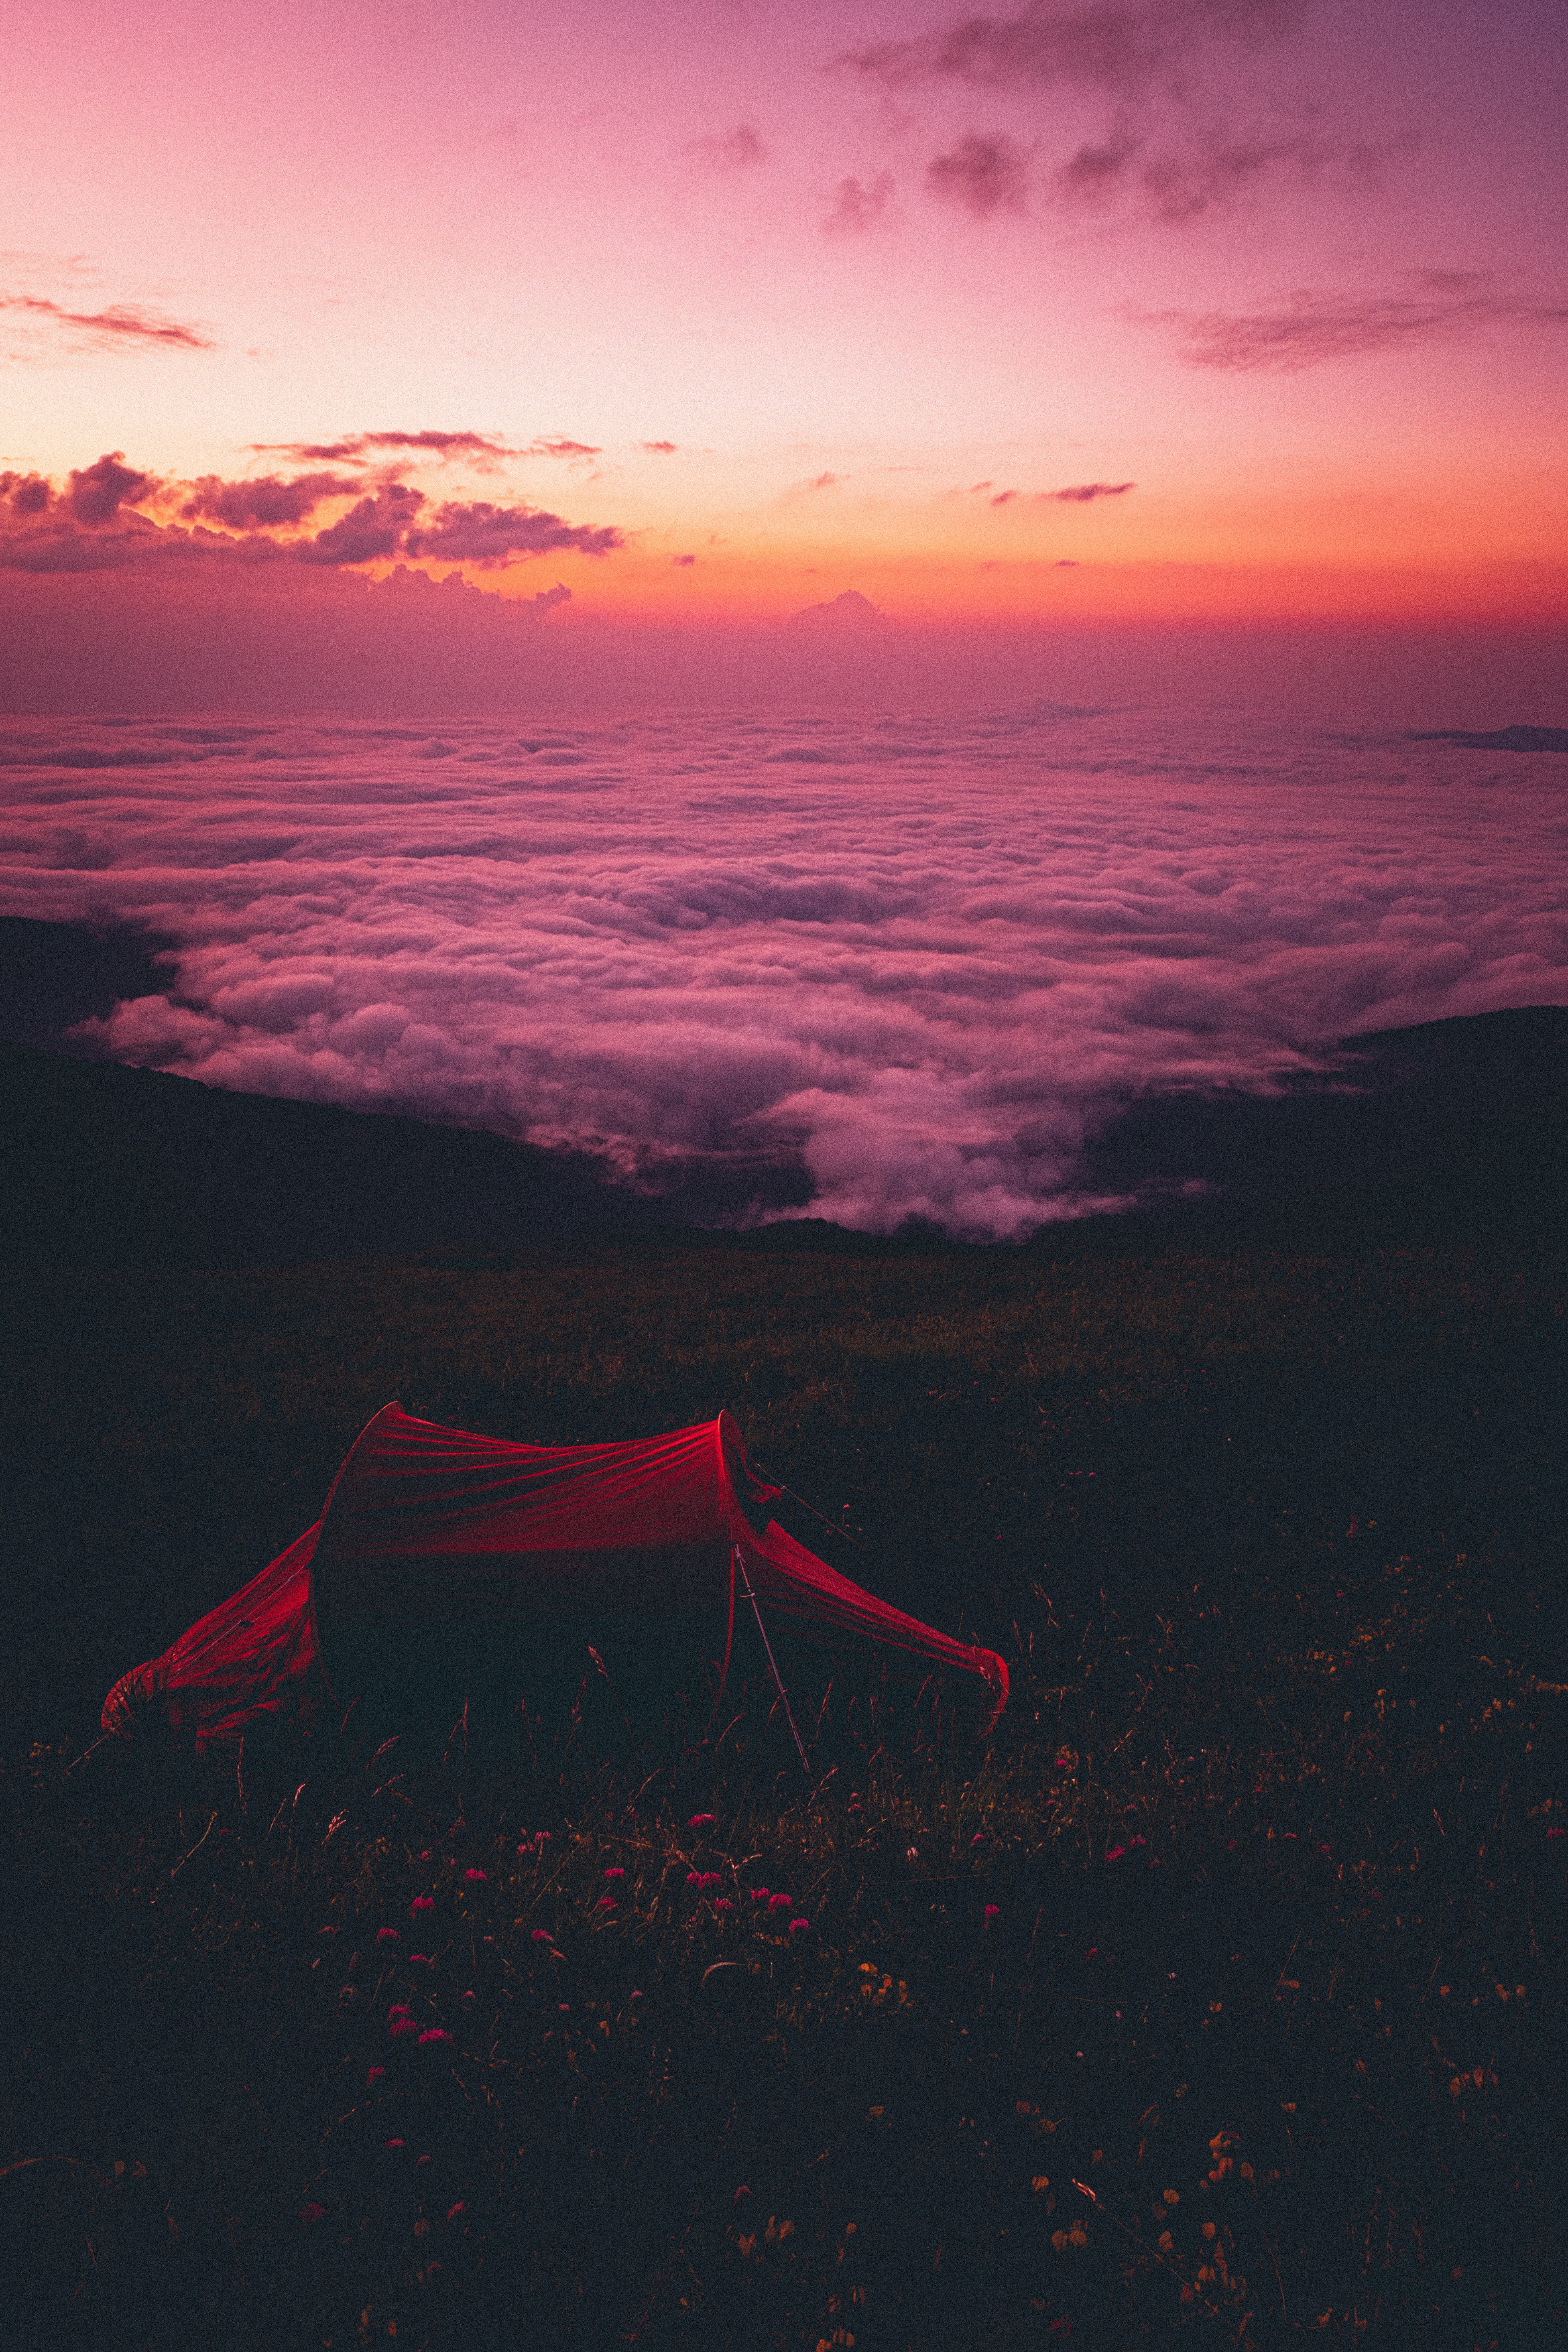 nature, sunset, clouds, handsomely, it's beautiful, tent, camping, campsite